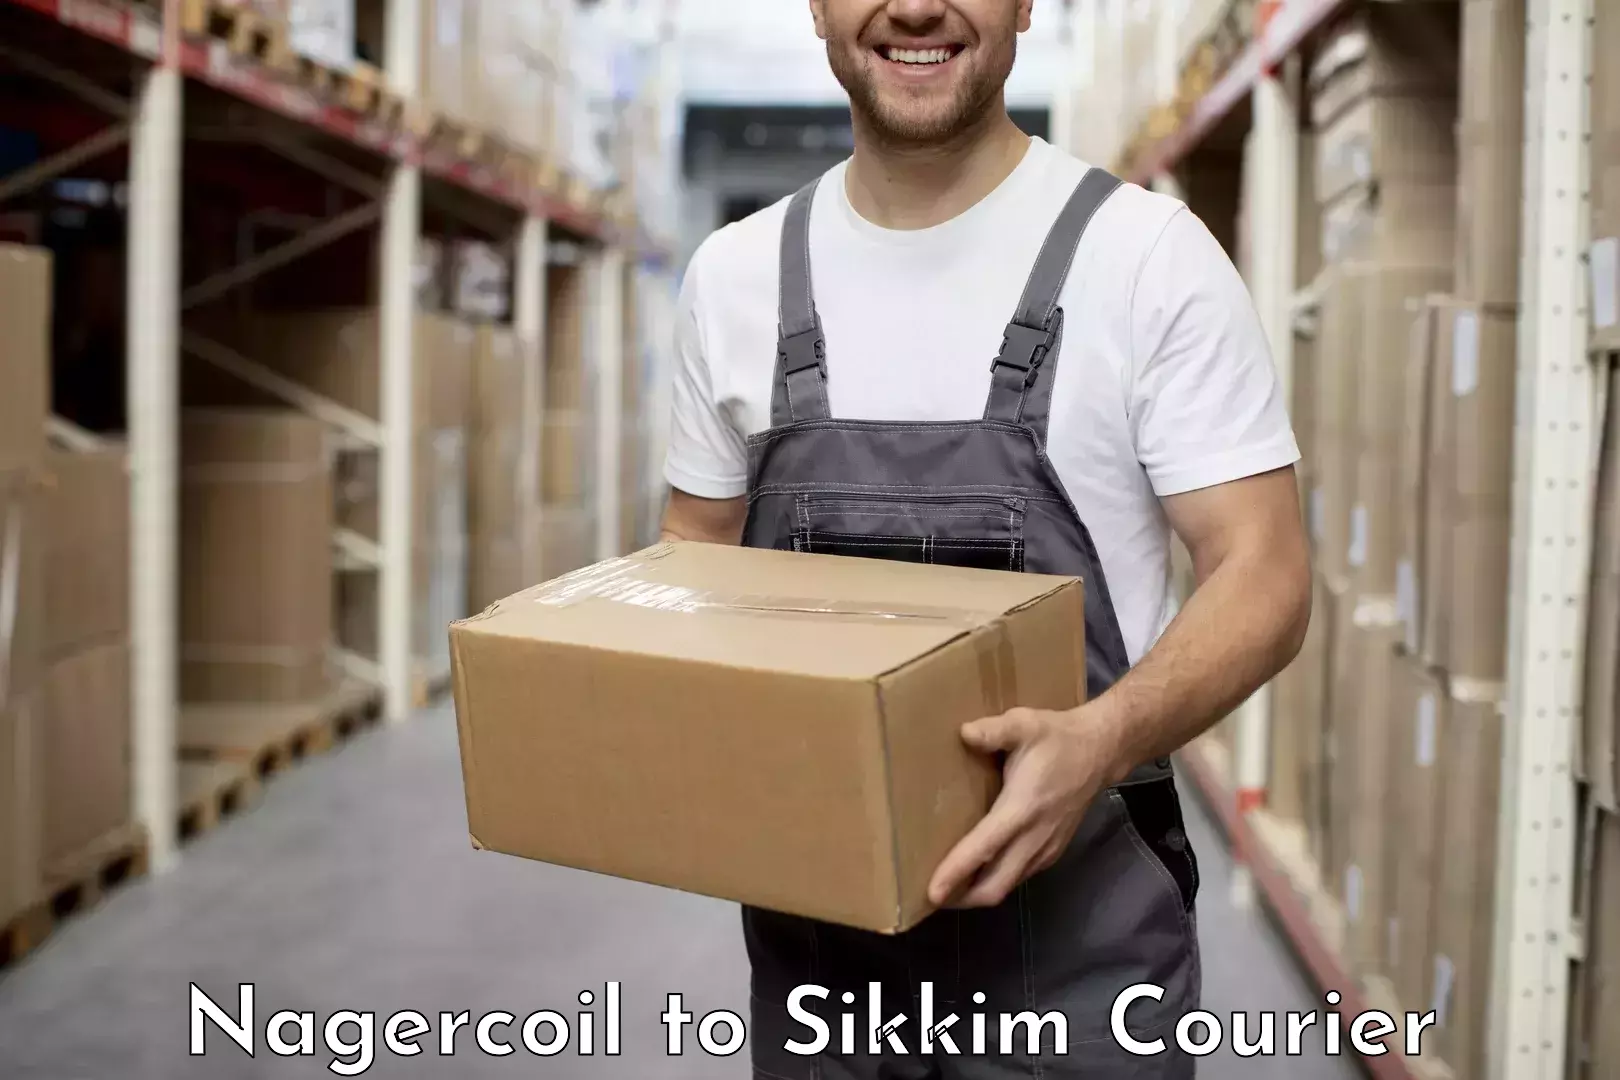 Professional courier handling Nagercoil to Sikkim